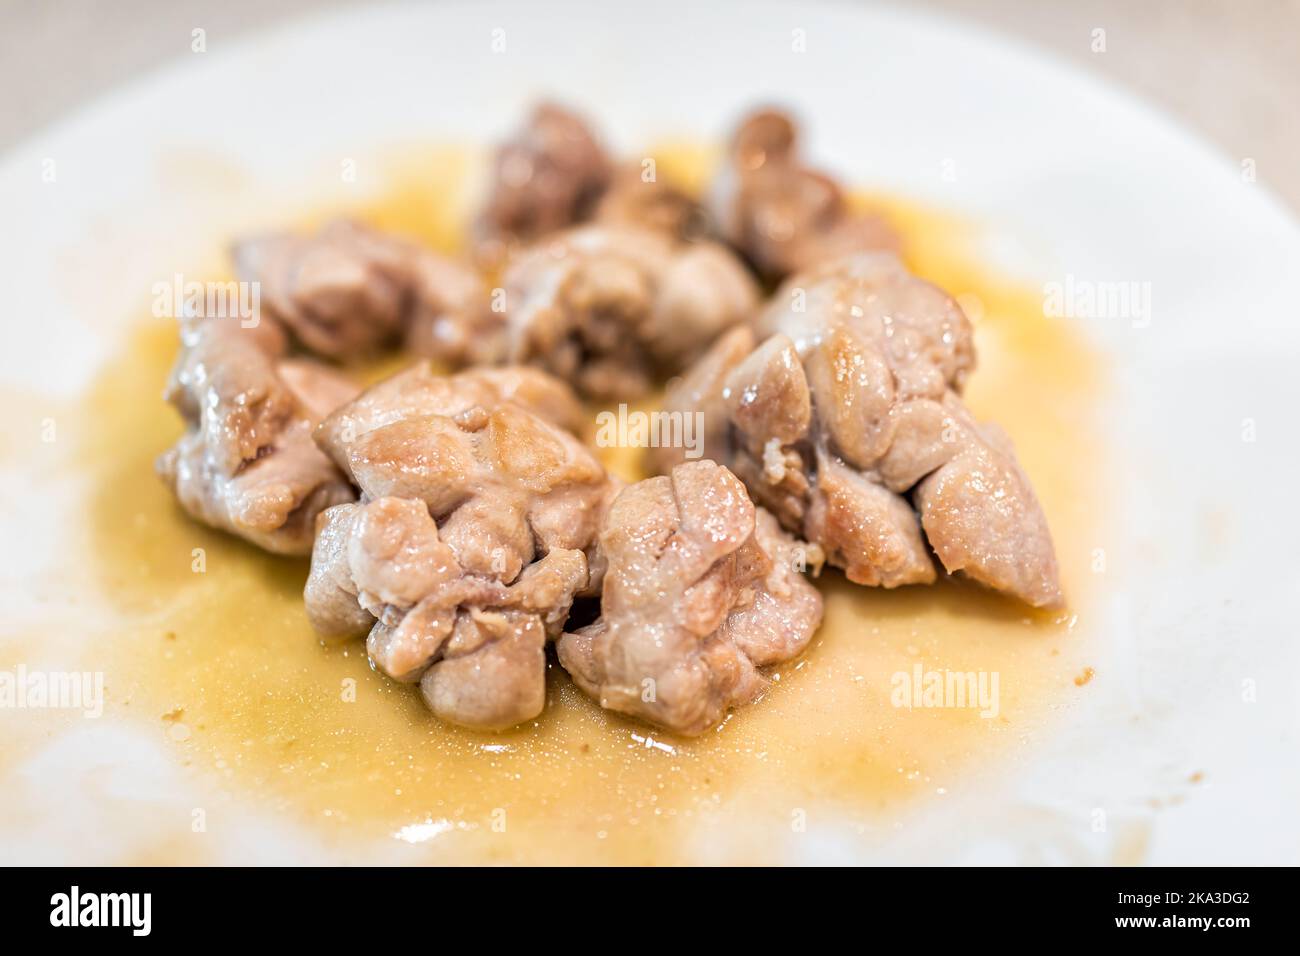 Macro closeup of fresh whole cooked fried beef sweetbreads thymus organ gland, nutritious ancestral meat homemade food on white plate on kitchen table Stock Photo